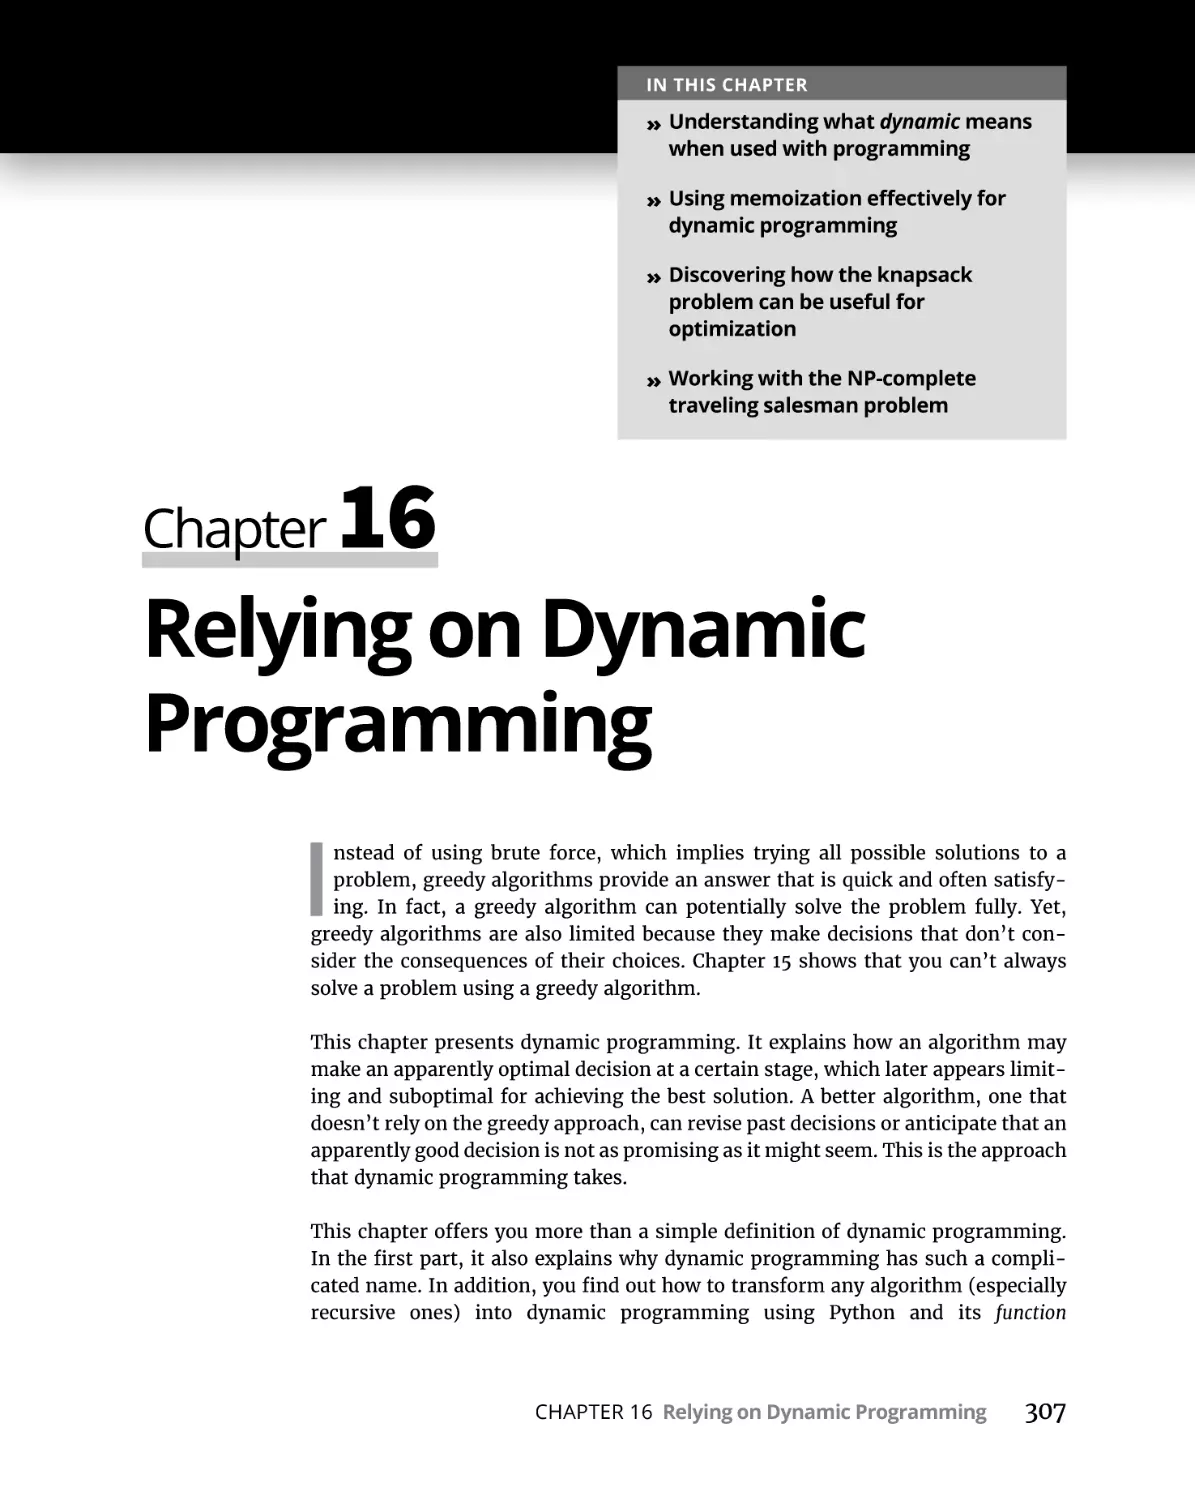 Chapter 16 Relying on Dynamic Programming